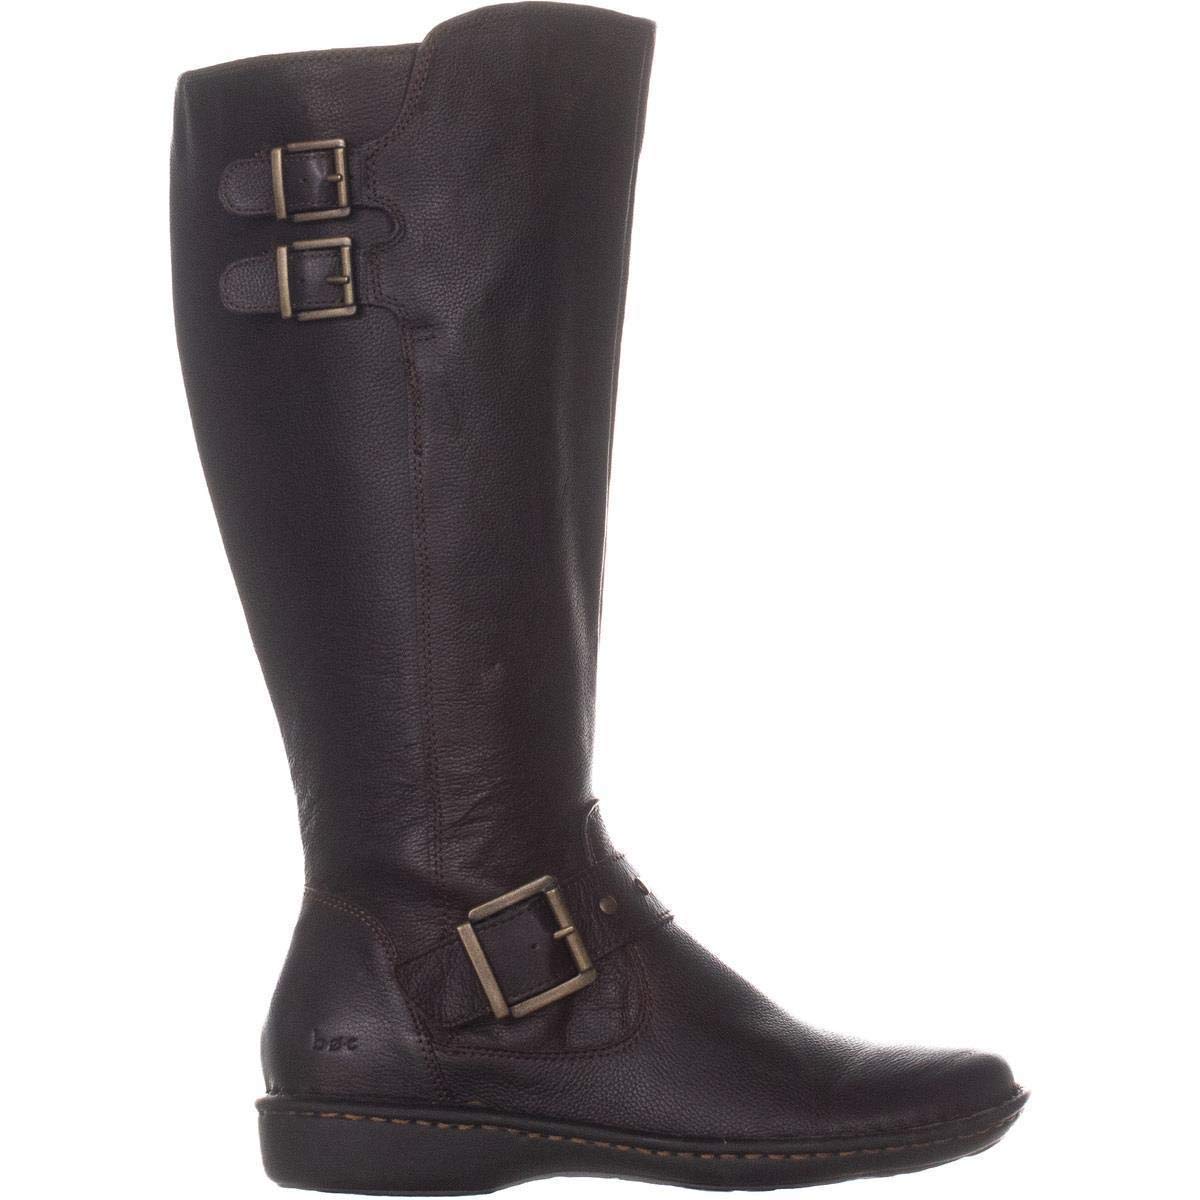 B.O.C Womens Boots in Brown Color, Size 6 YWS | eBay